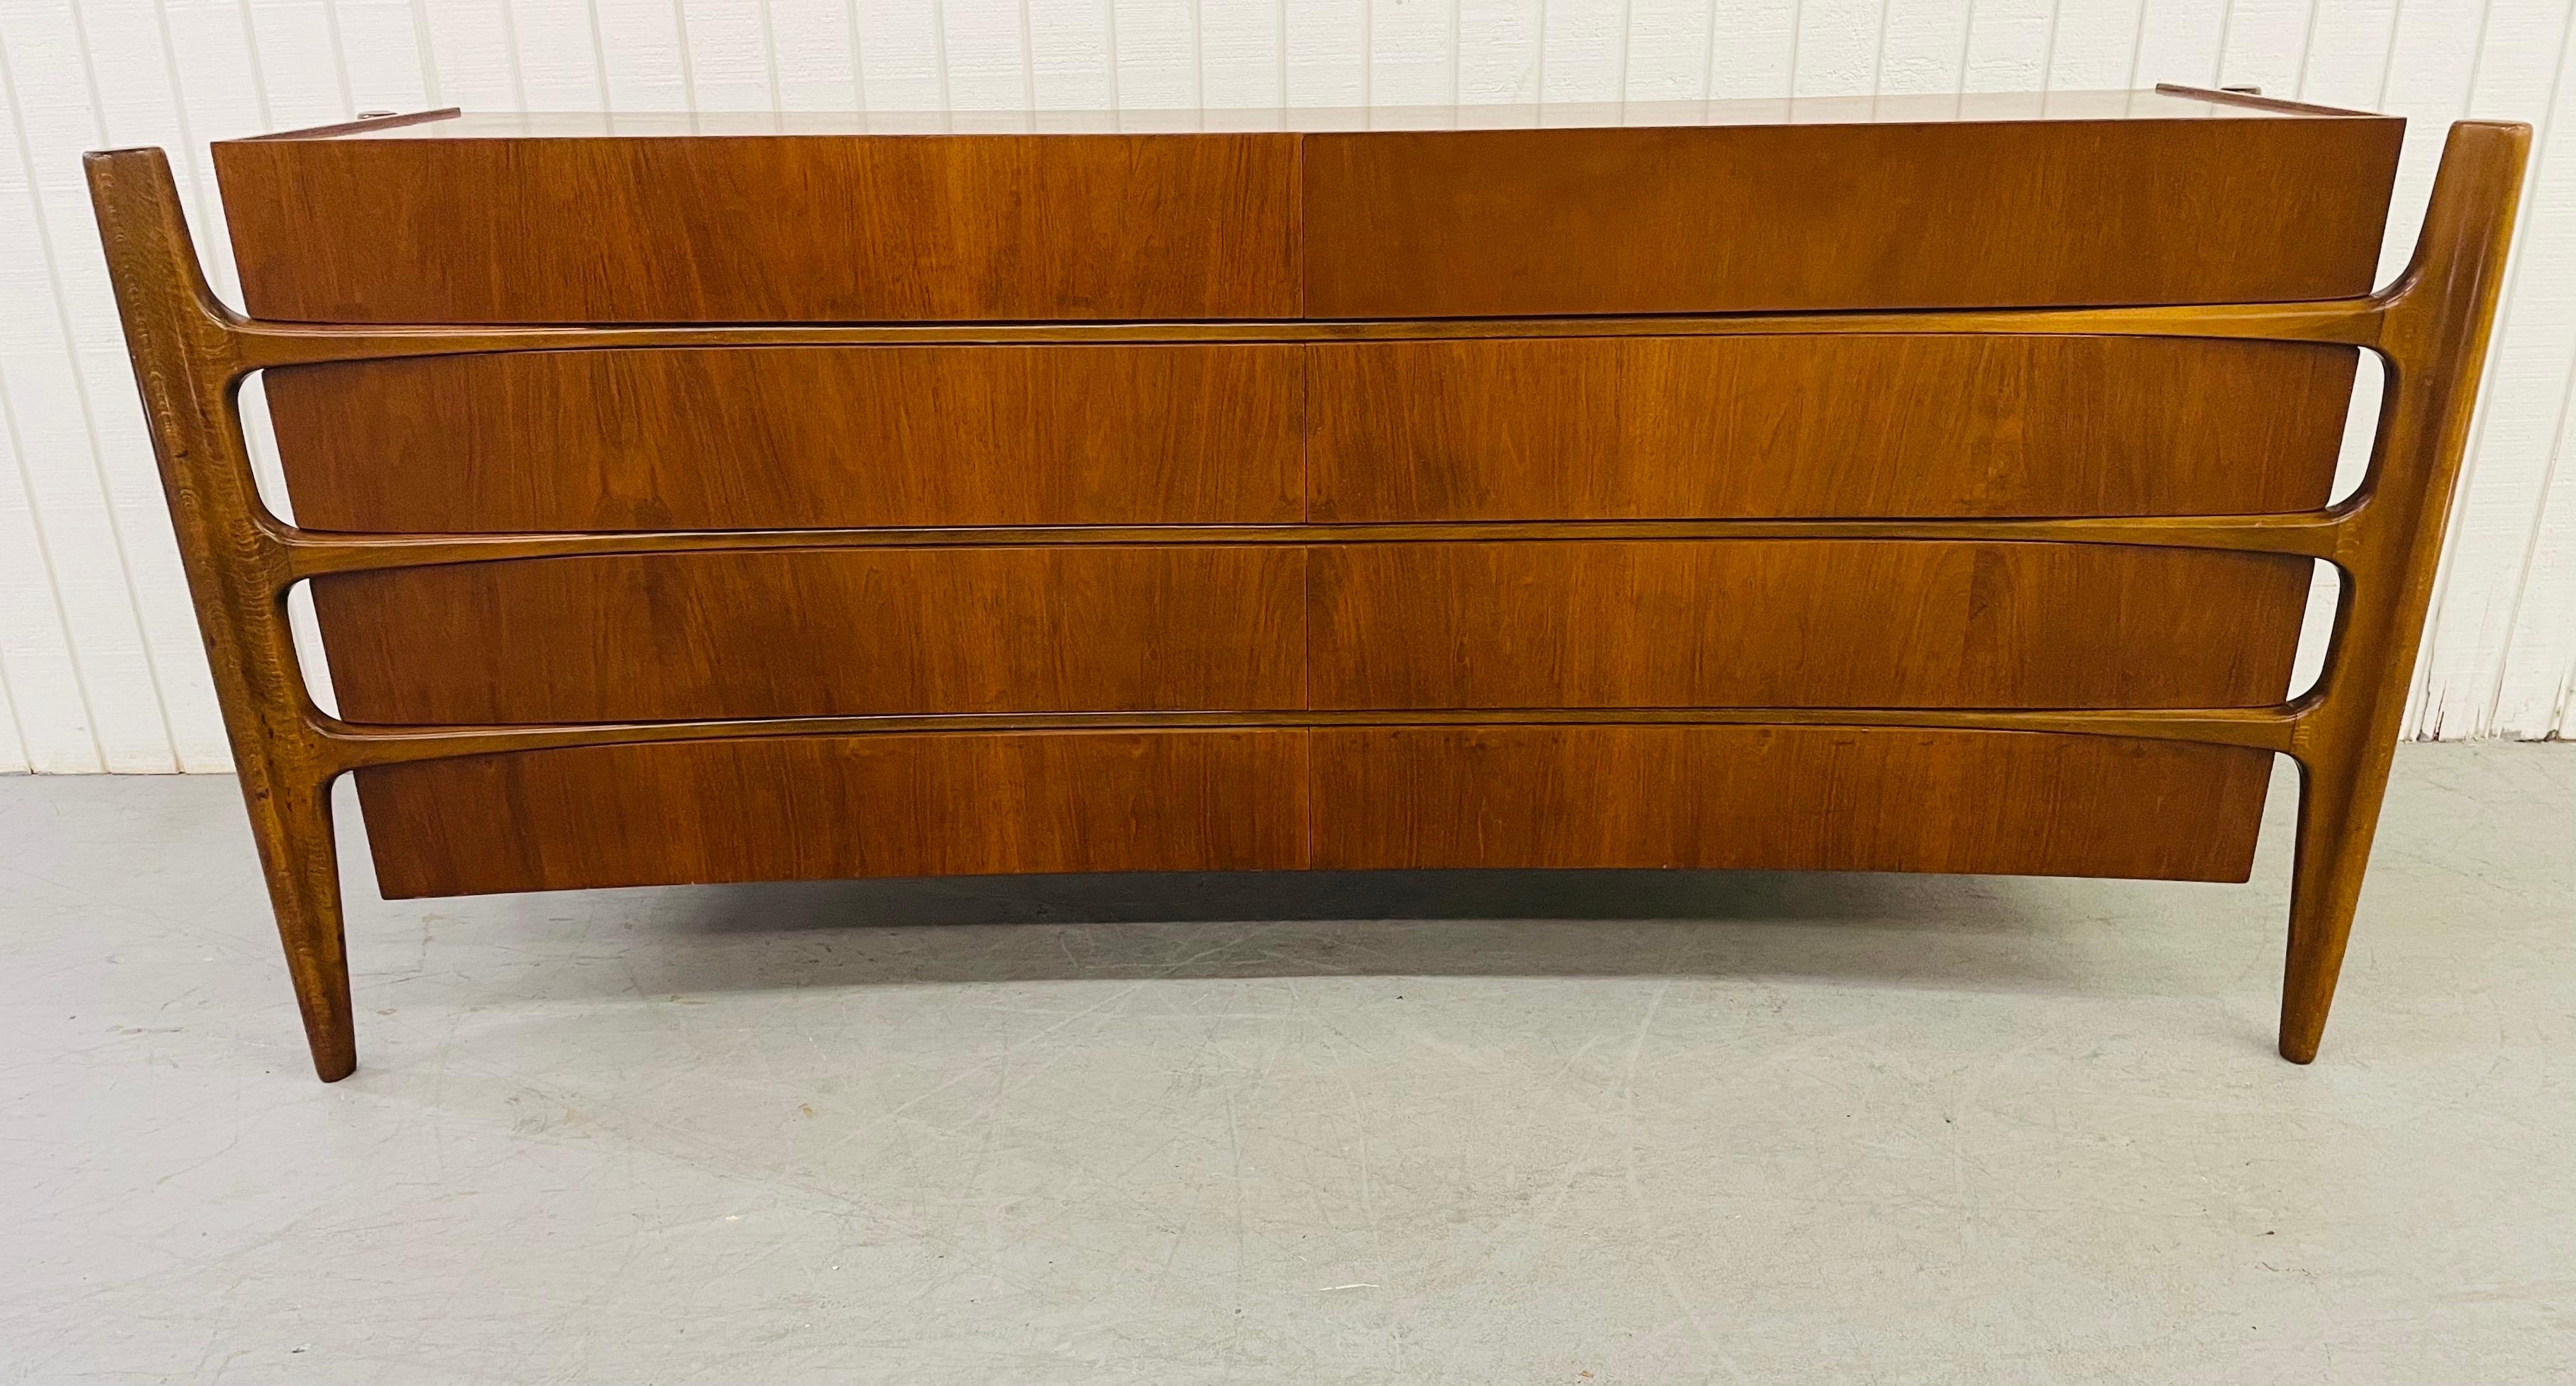 This listing is for a mid-century Scandinavian sculptural William Hinn Walnut Dresser. Featuring eight drawers for storage, a beautiful walnut finish, and an unbelievable design by William Hinn.